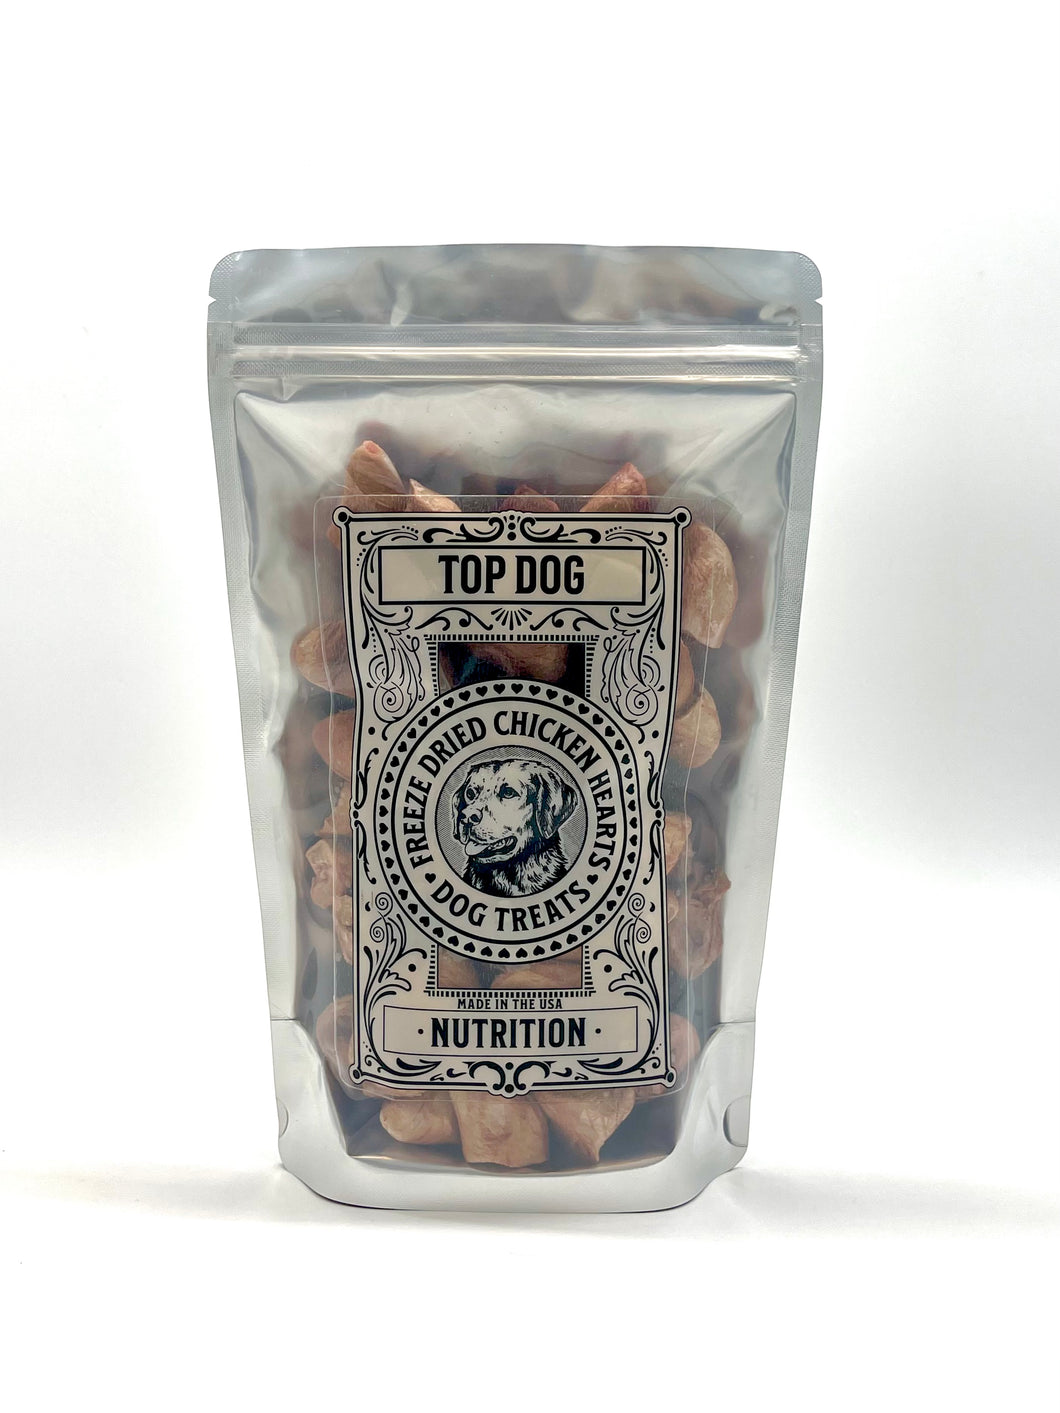 Premium freeze dried chicken hearts for dogs